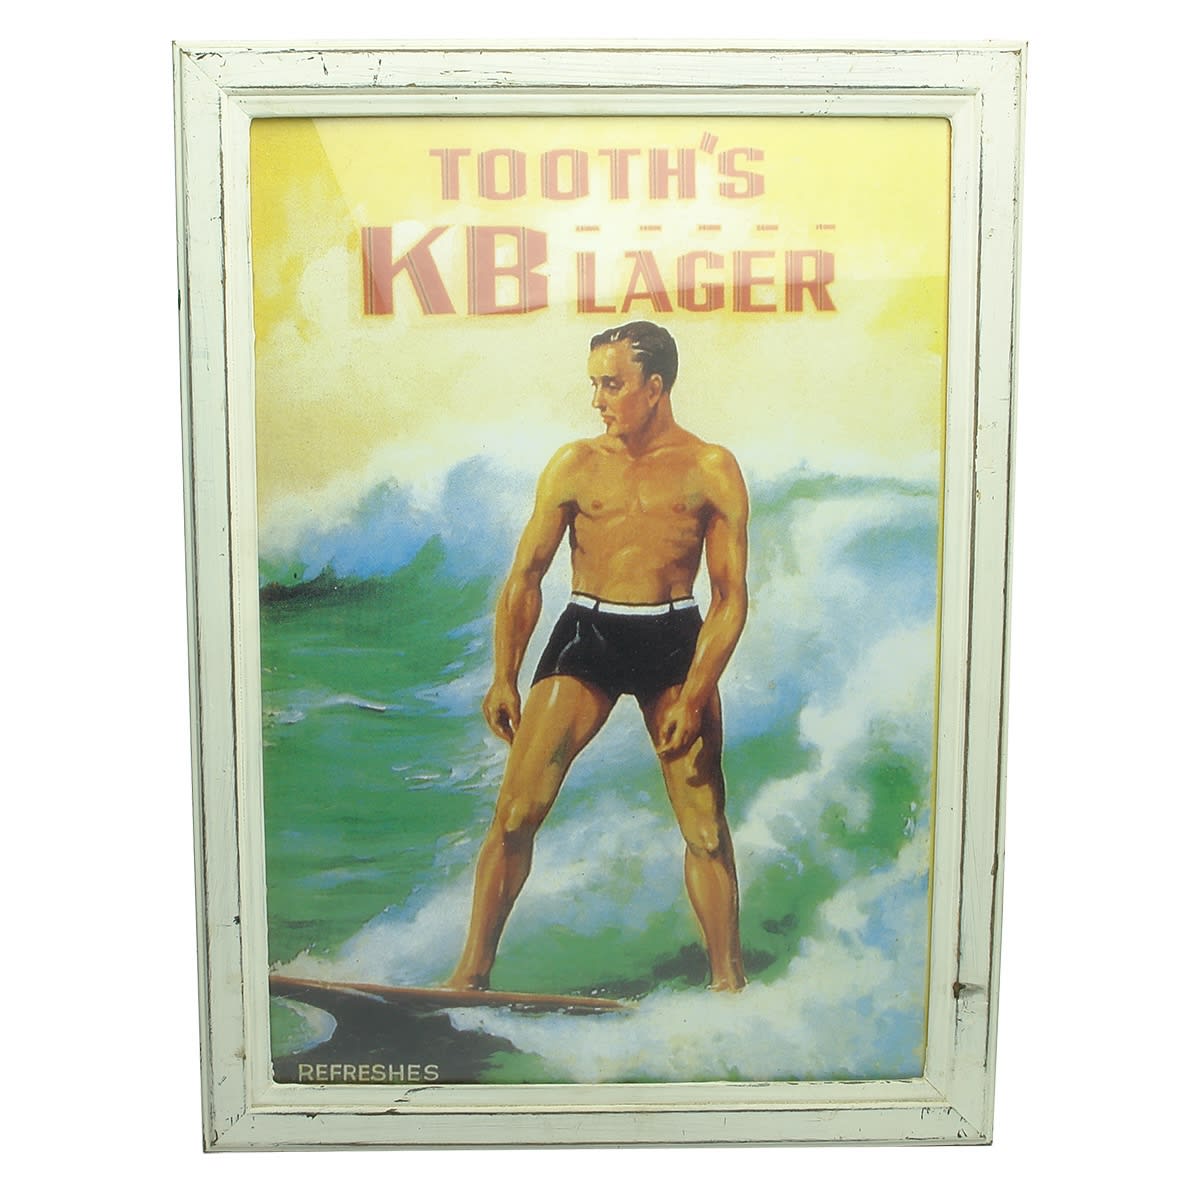 Reproduction framed poster. Tooth's KB Lager. Surfer. (Sydney, New South Wales)